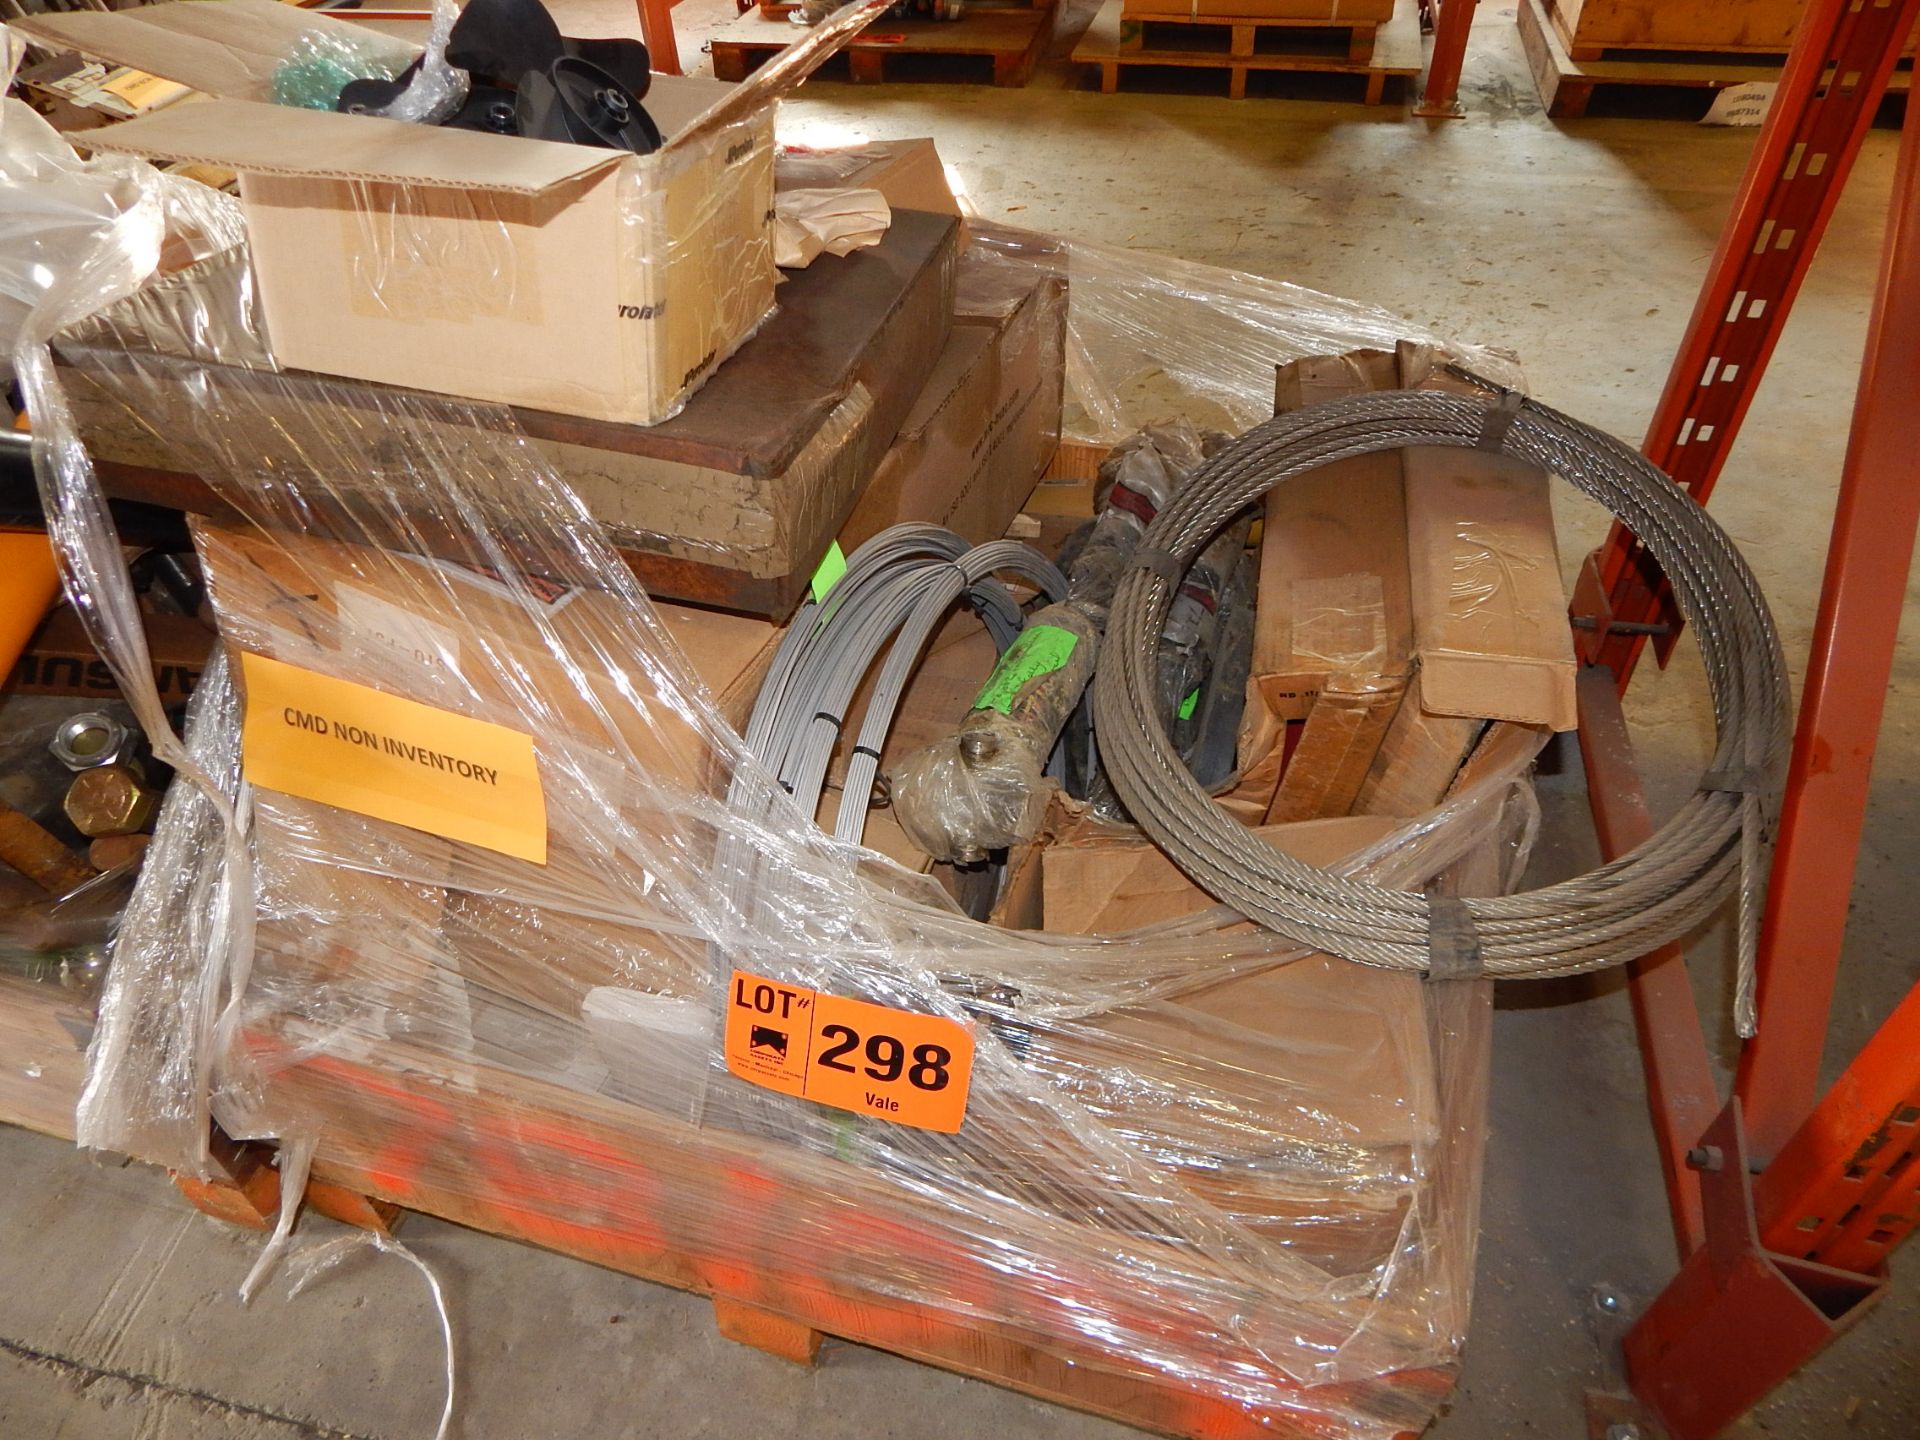 LOT/ CONTENTS OF SKID CONSISTING OF SPARE PARTS, FANS, DRIVE SHAFTS, WIRE CABLE (LOCATED AT CMD